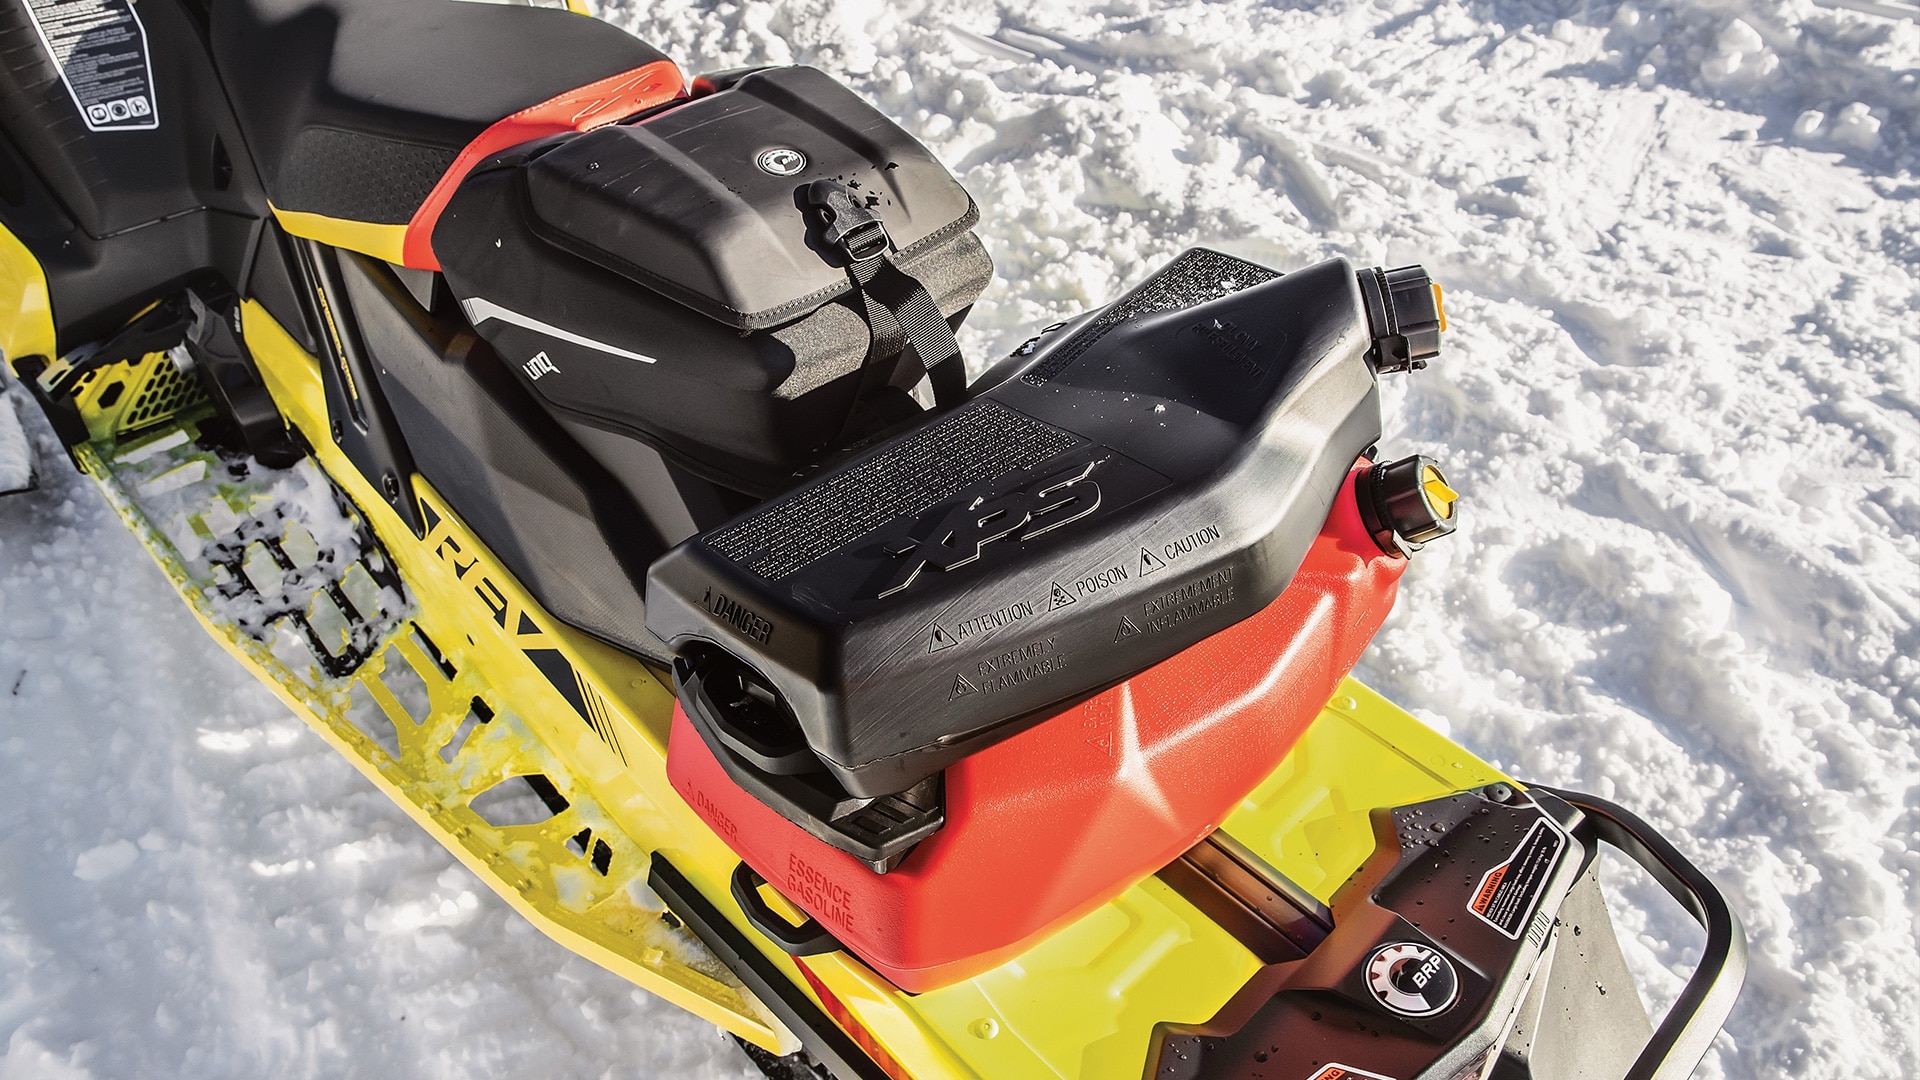 WHAT TYPE OF GAS SHOULD I PUT IN MY SKI-DOO?